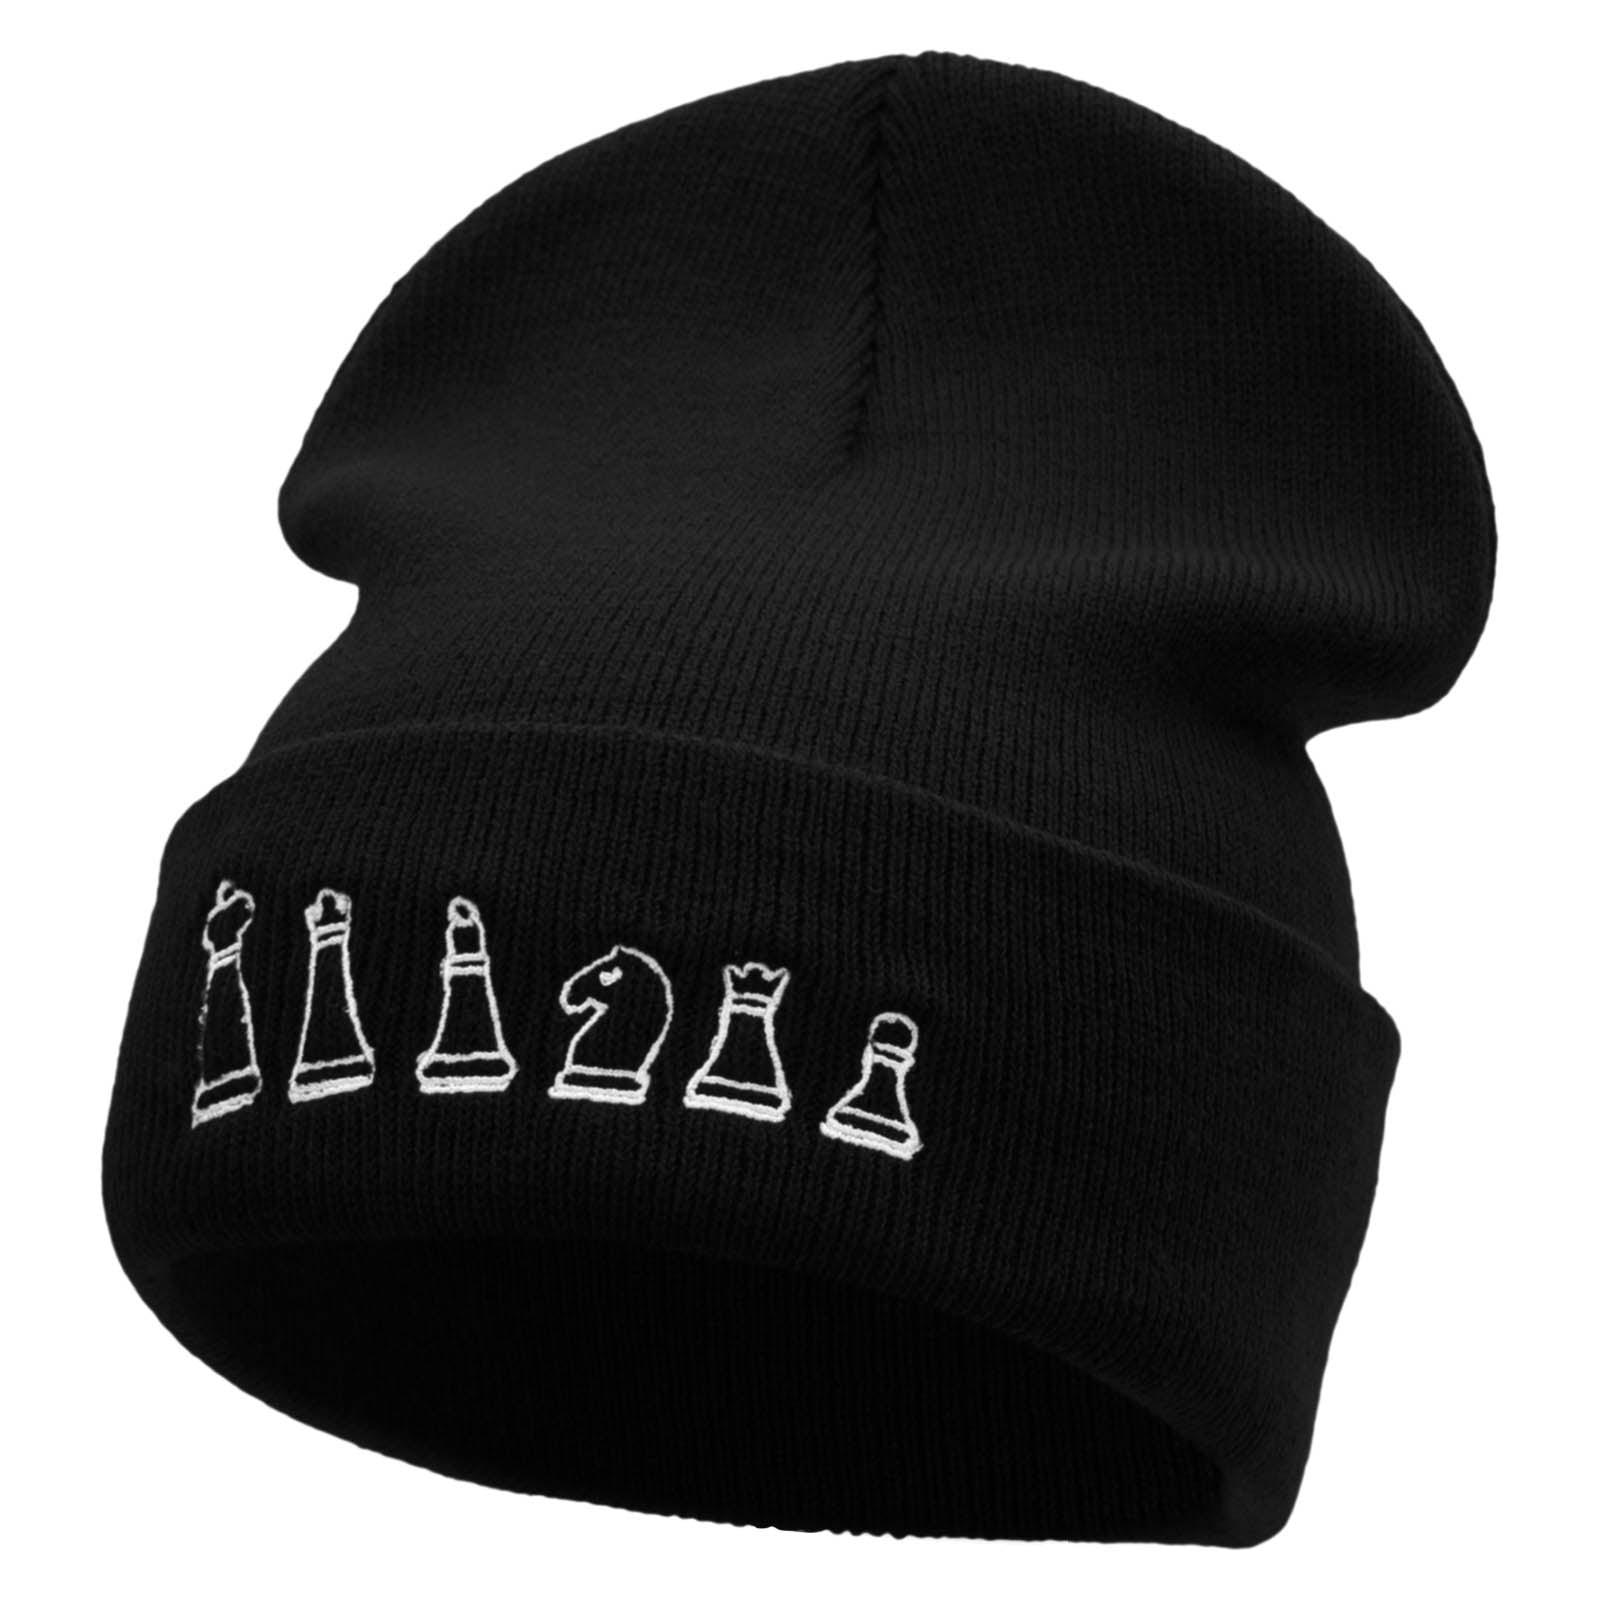 The Chest Set Embroidered 12 Inch Long Knitted Beanie - Black OSFM